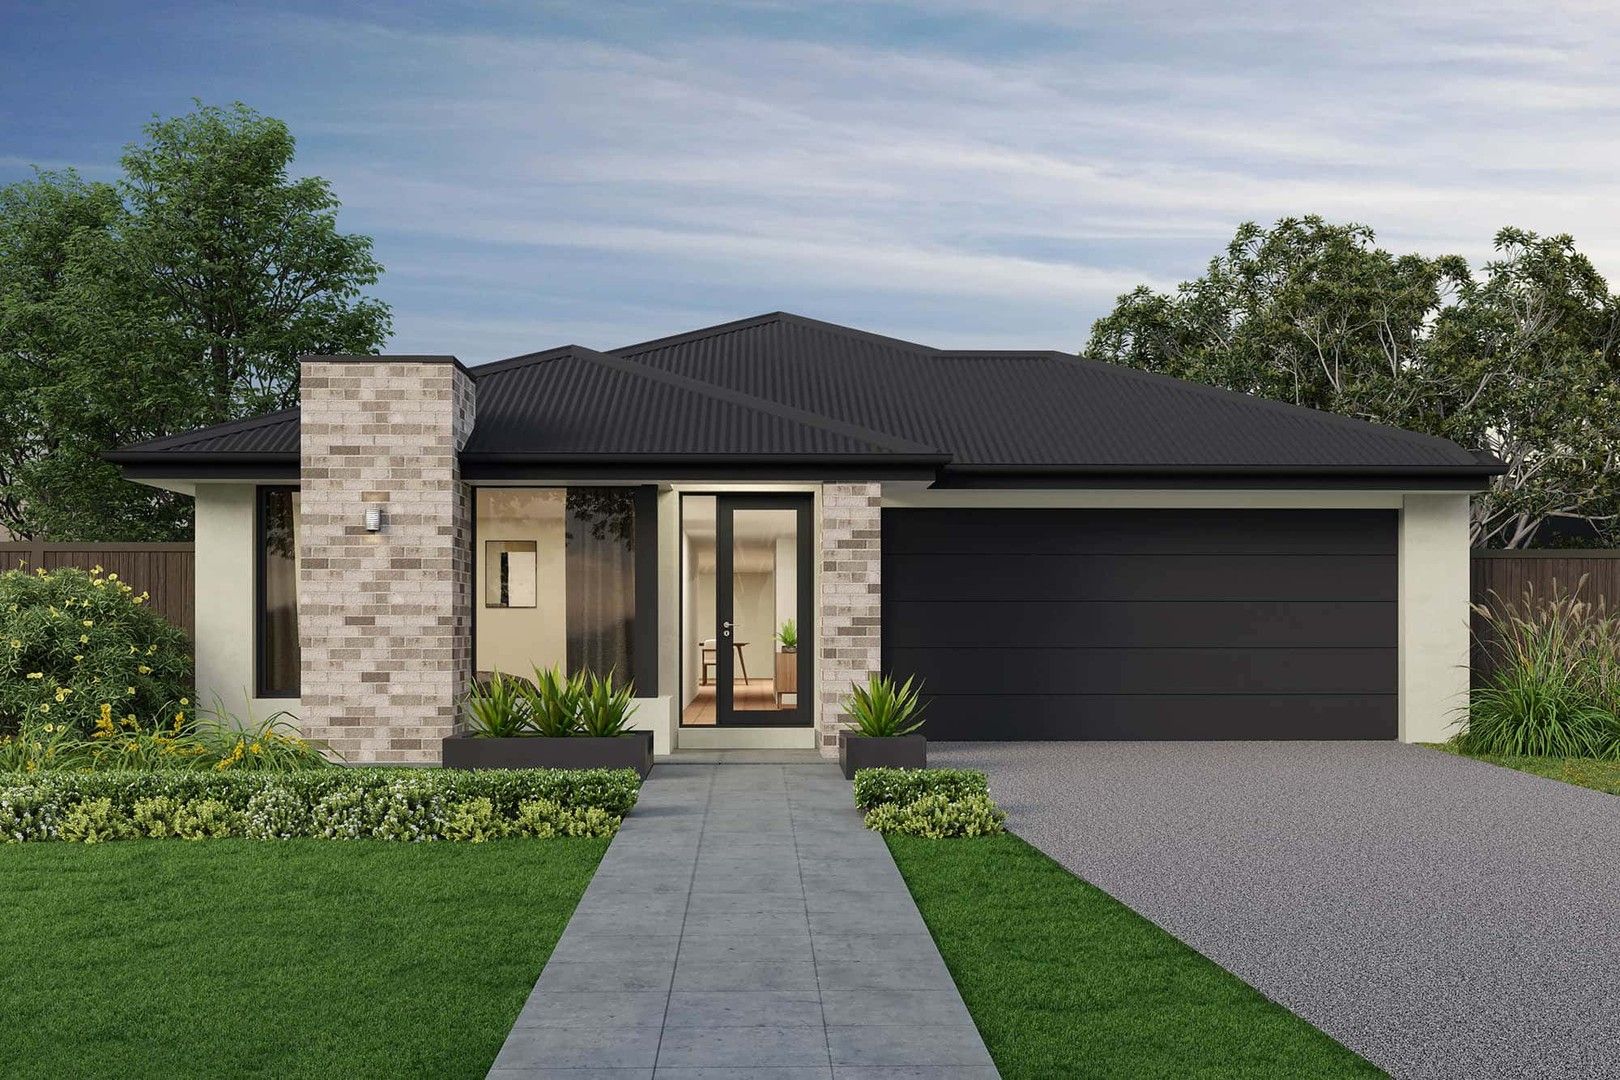 4 bedrooms New Home Designs in Lot 259 Norling Way SAN REMO VIC, 3925